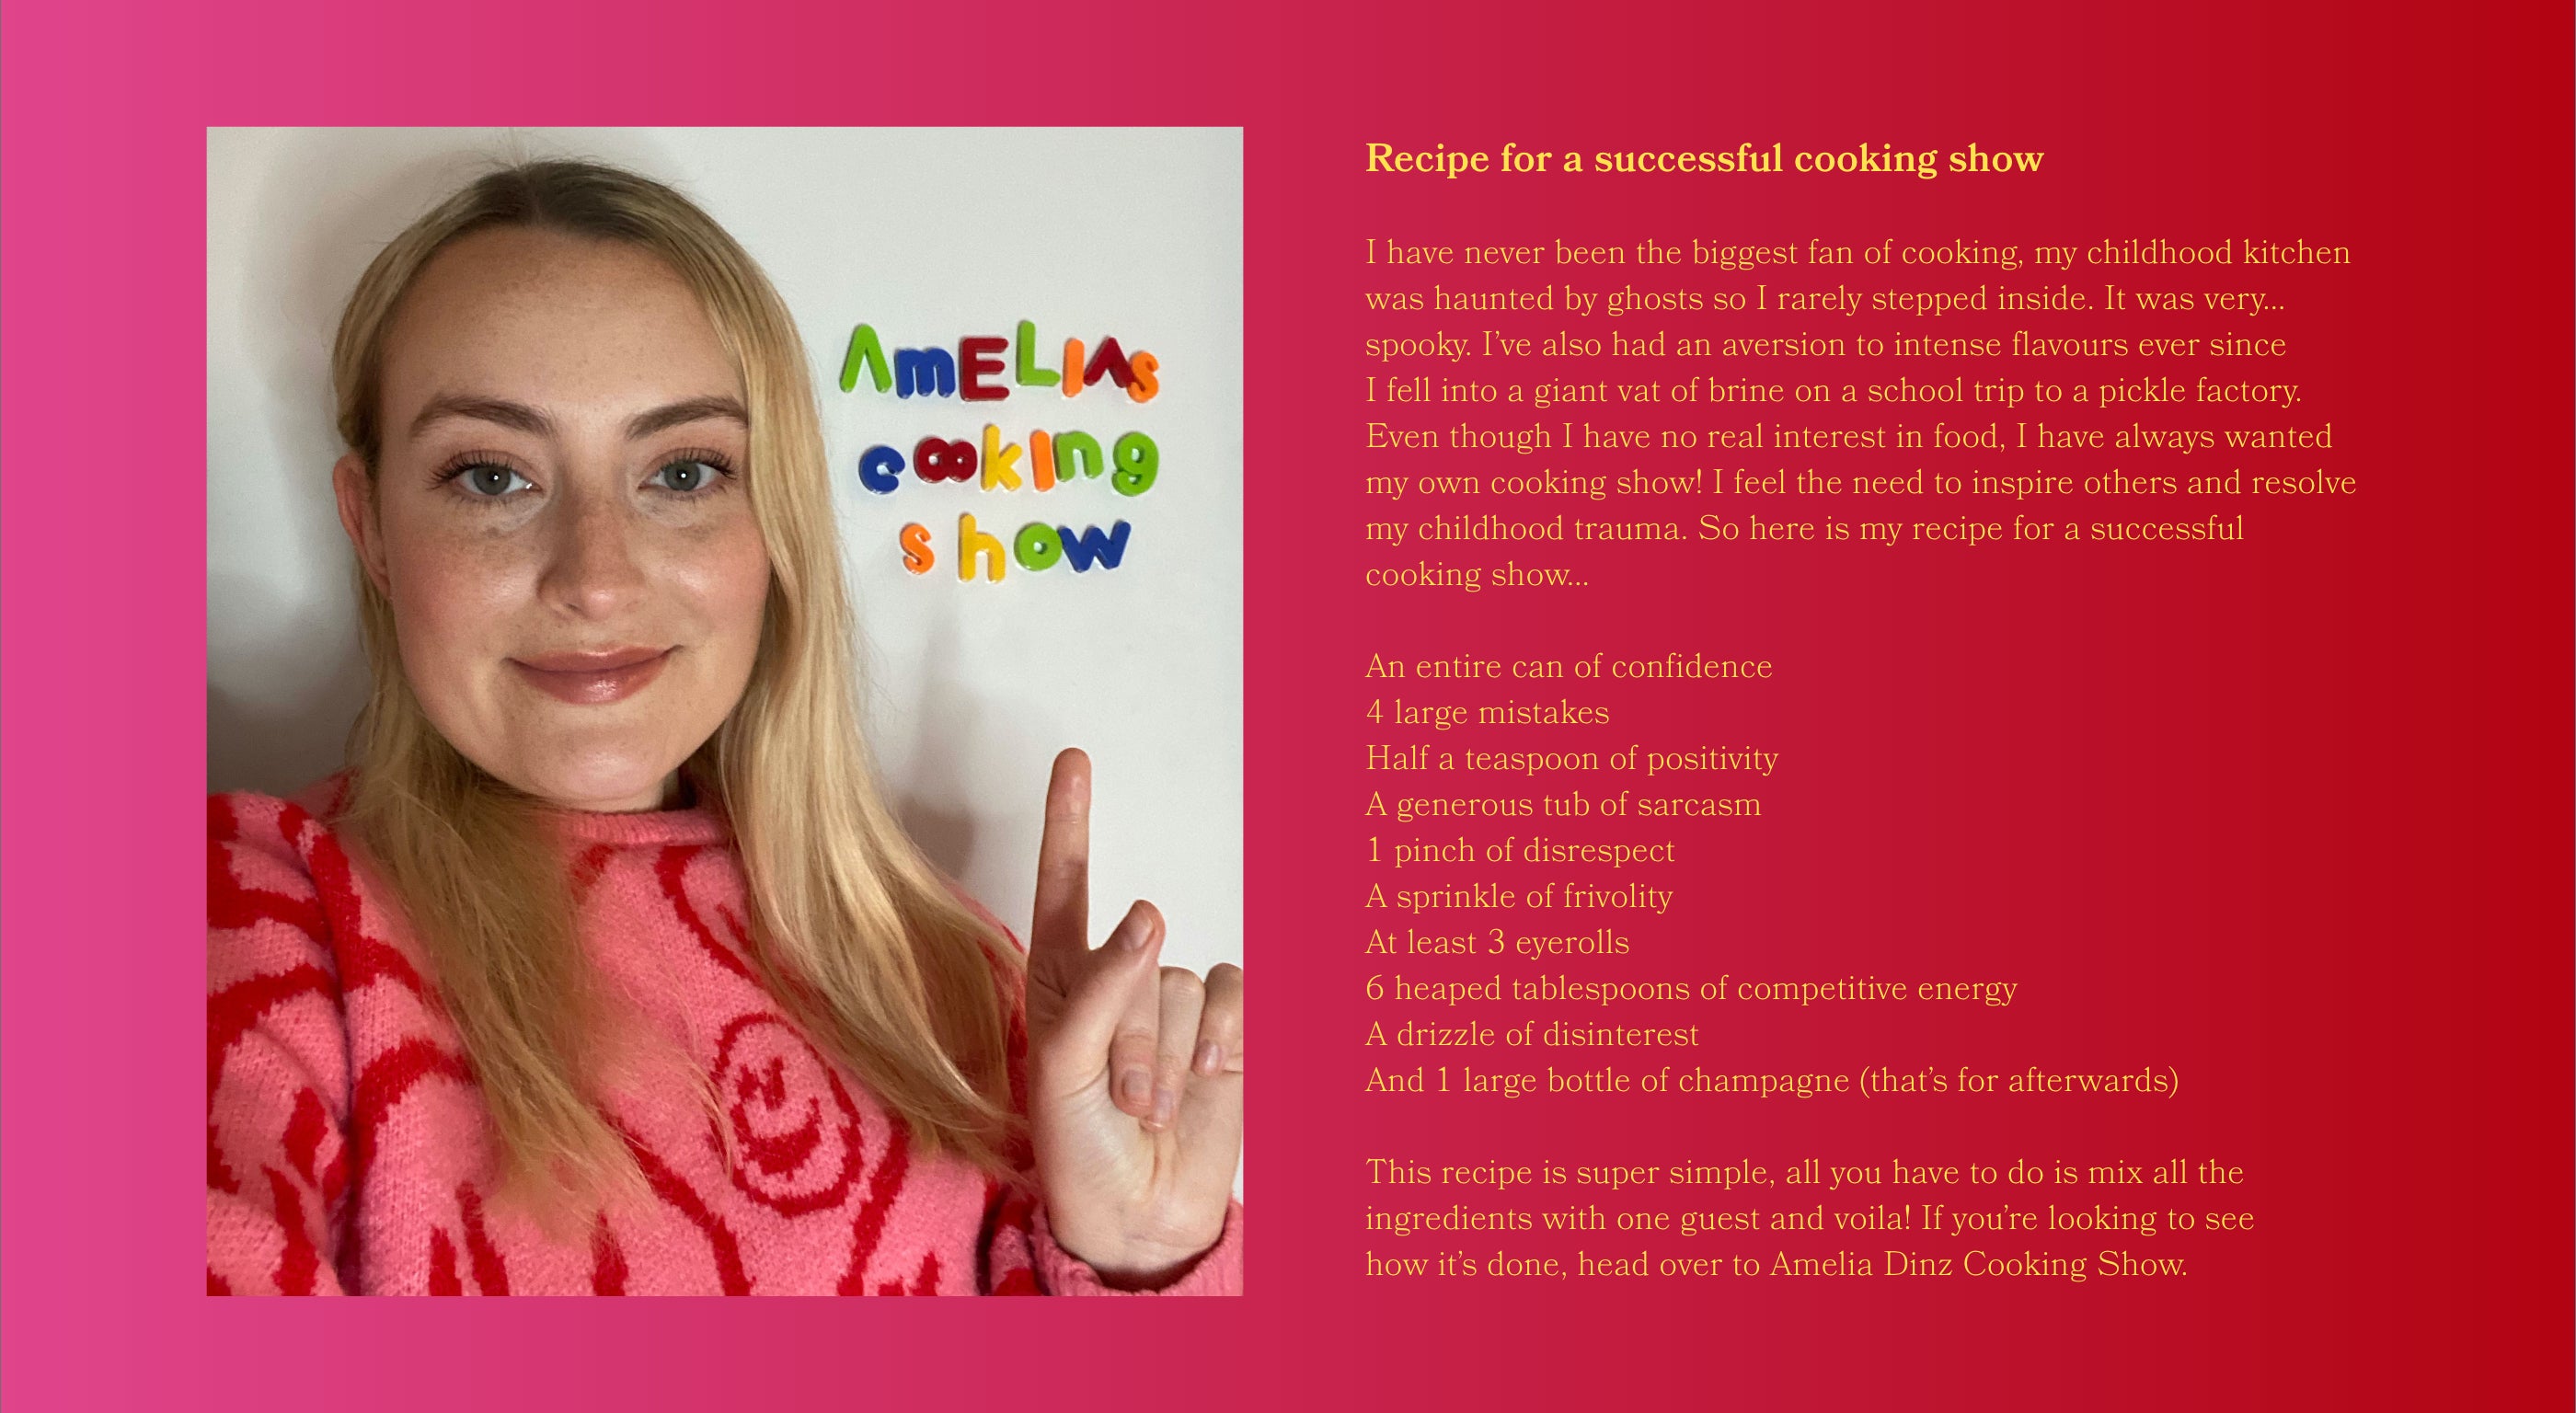 Amelia's cooking show